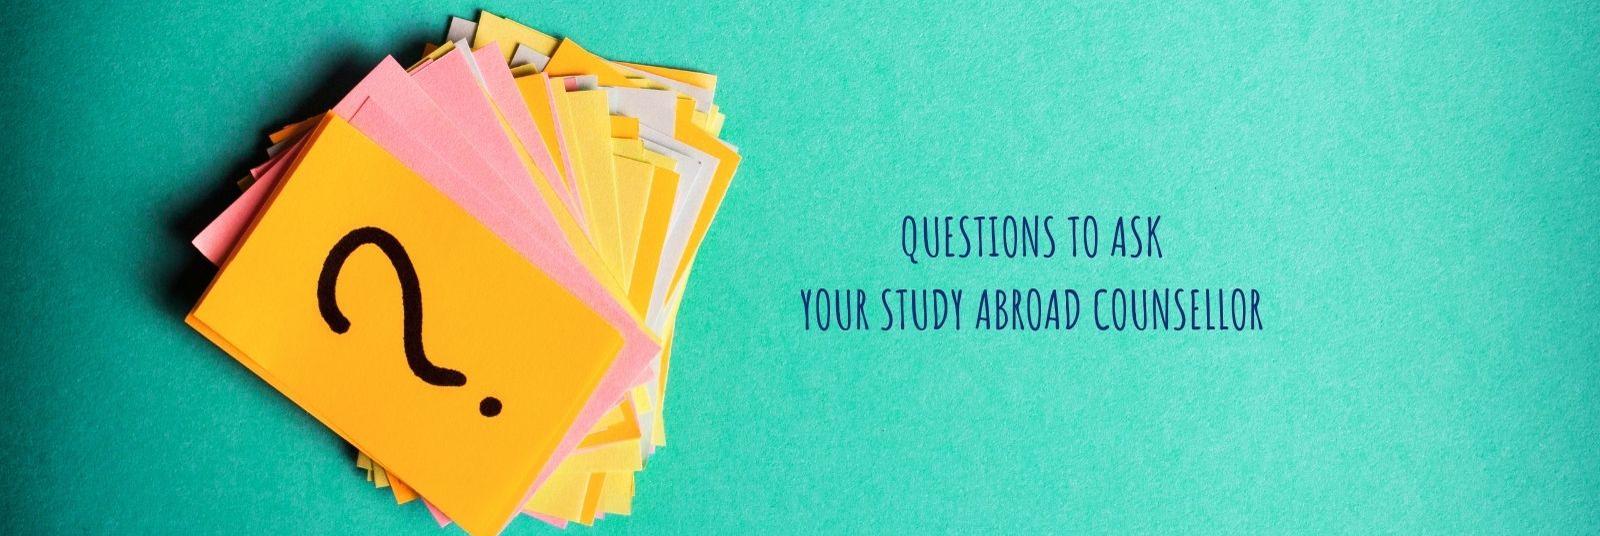 Questions to ask a study abroad counsellor